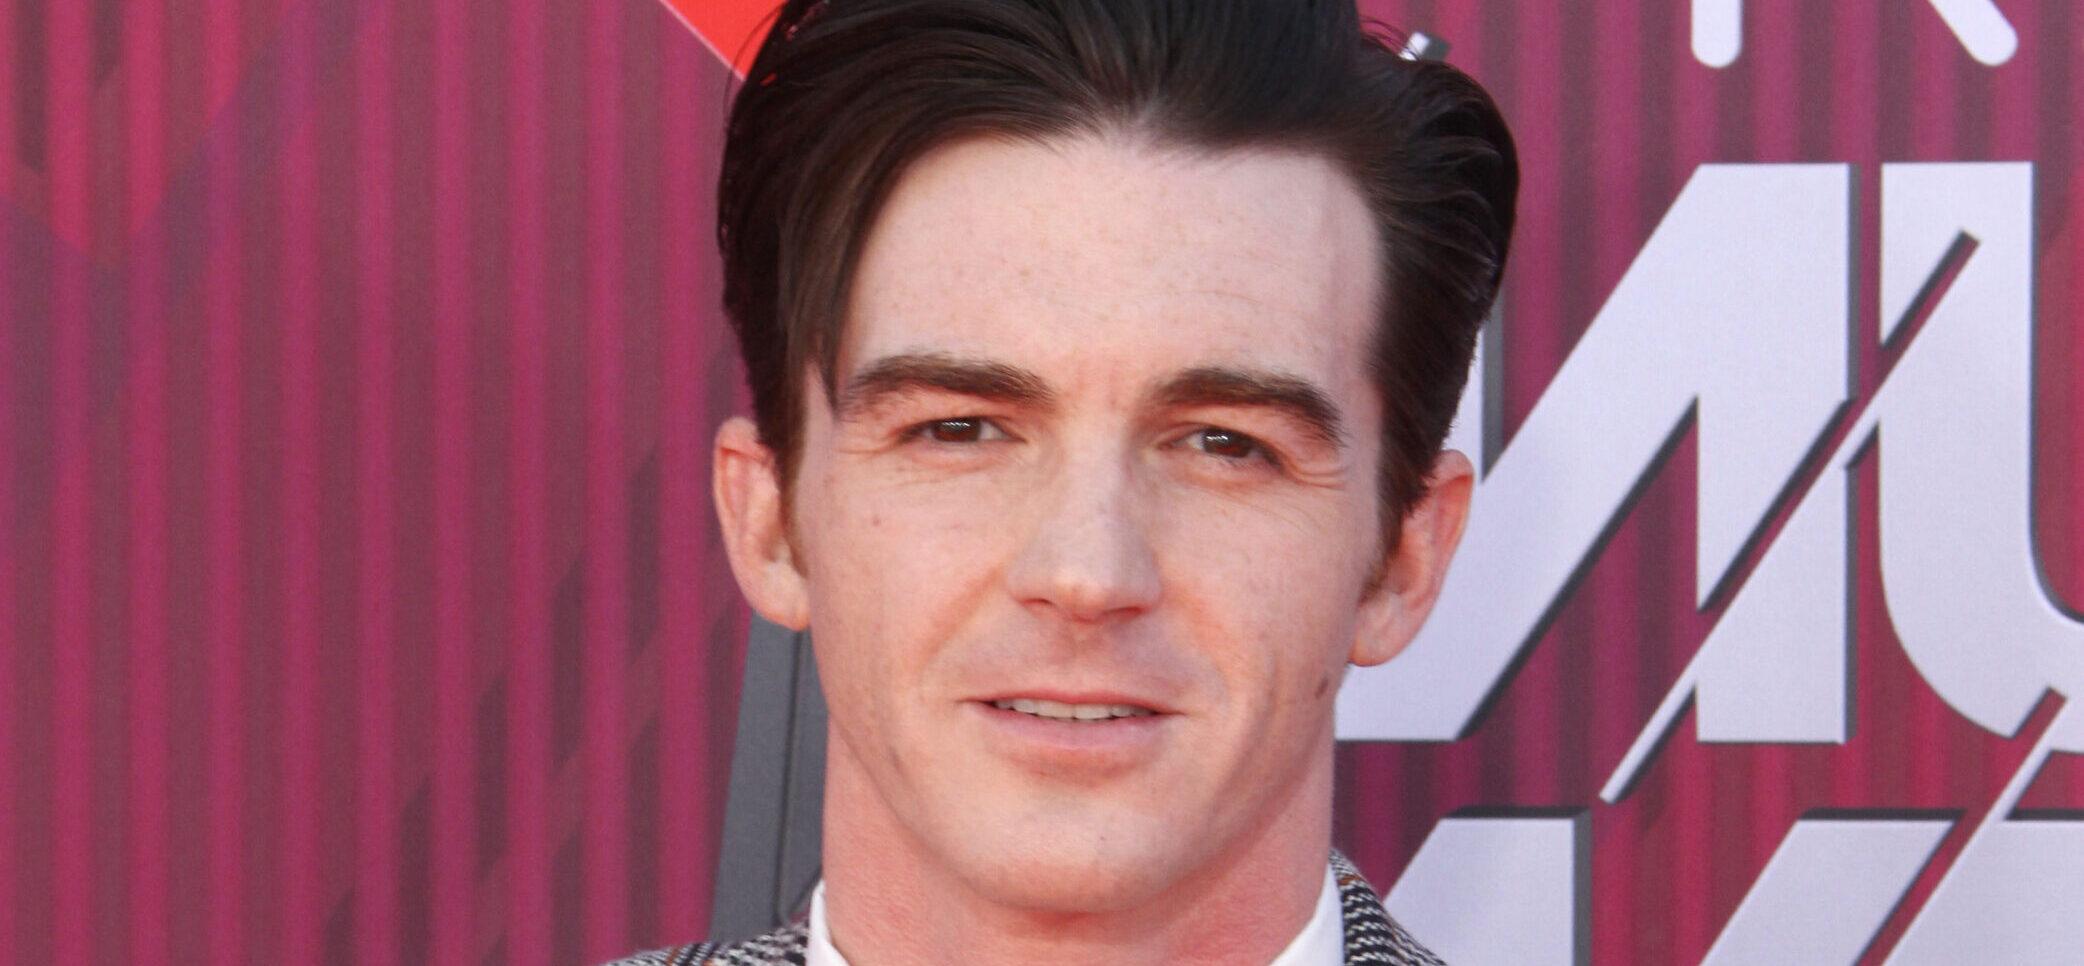 Drake Bell at The 2019 iHeartRadio Music Awards in Los Angeles